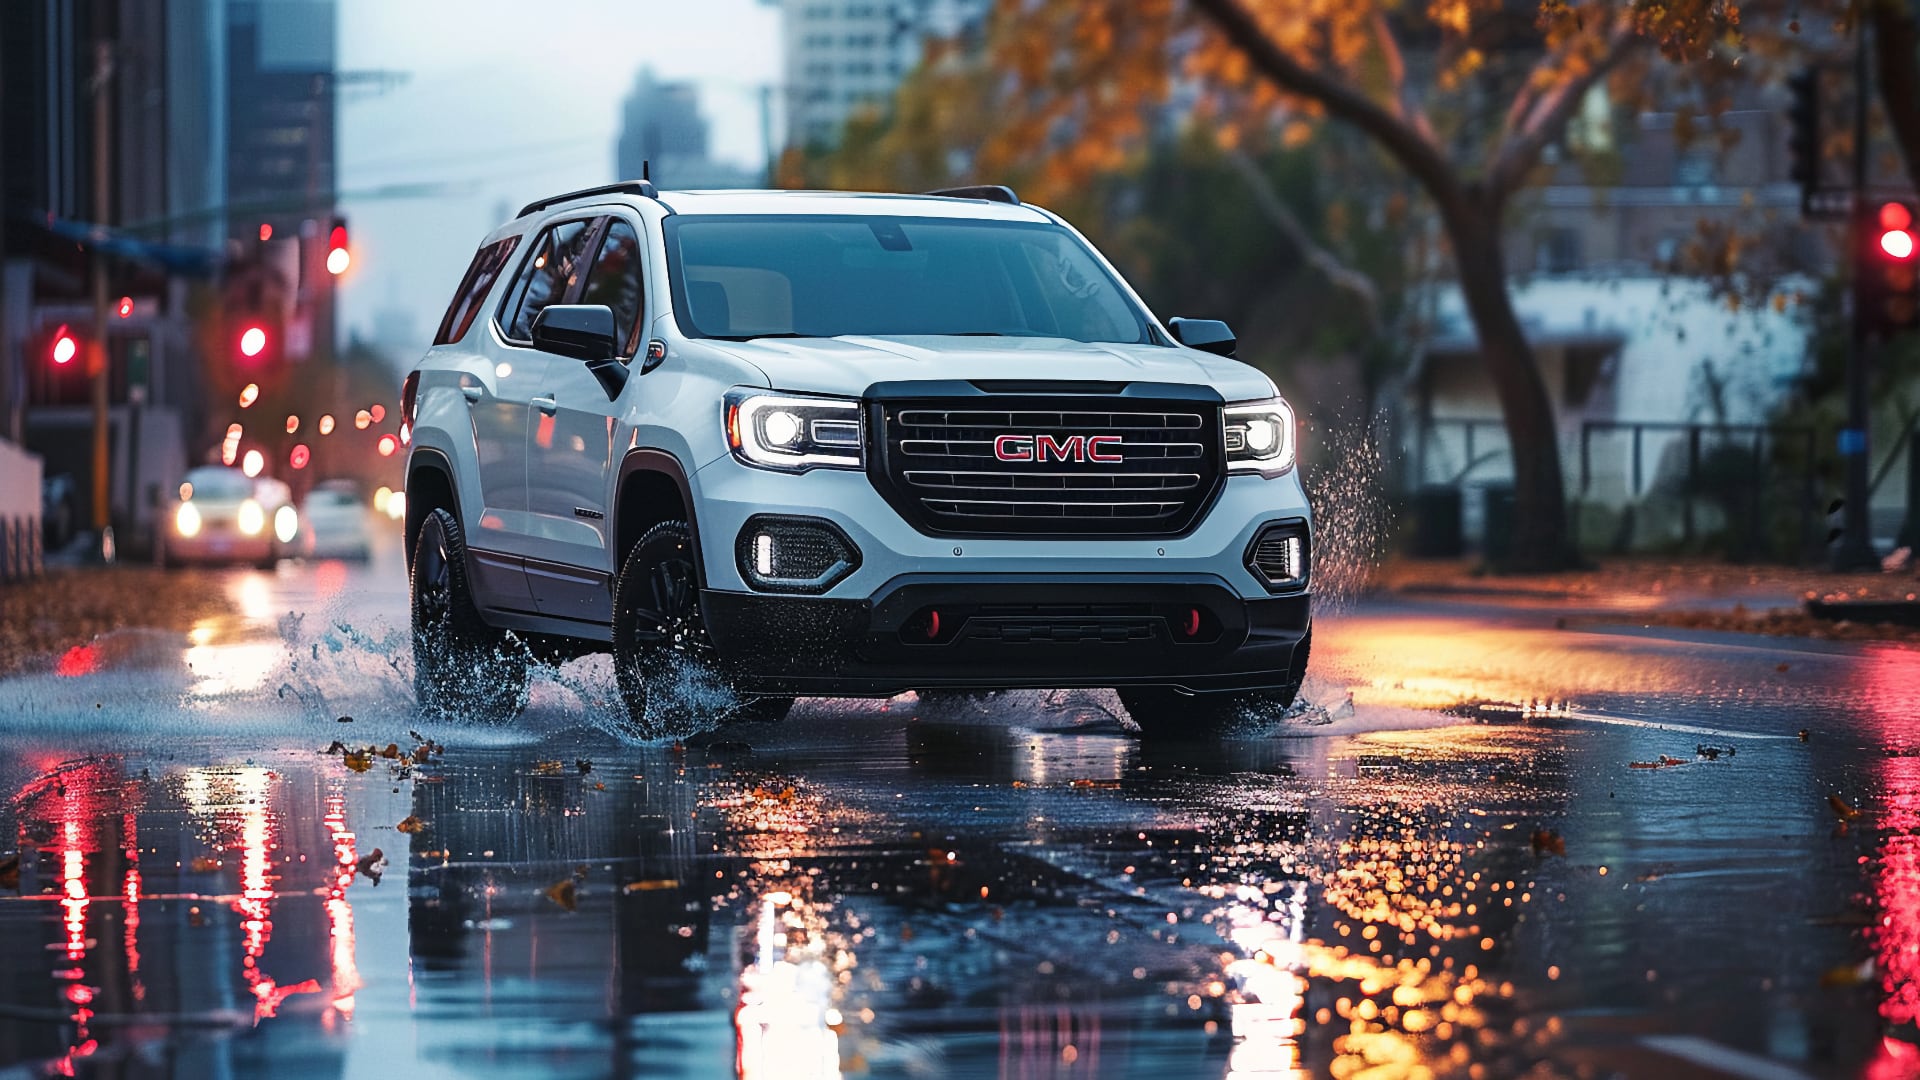 The 2019 GMC Terrain is driving on a wet street.